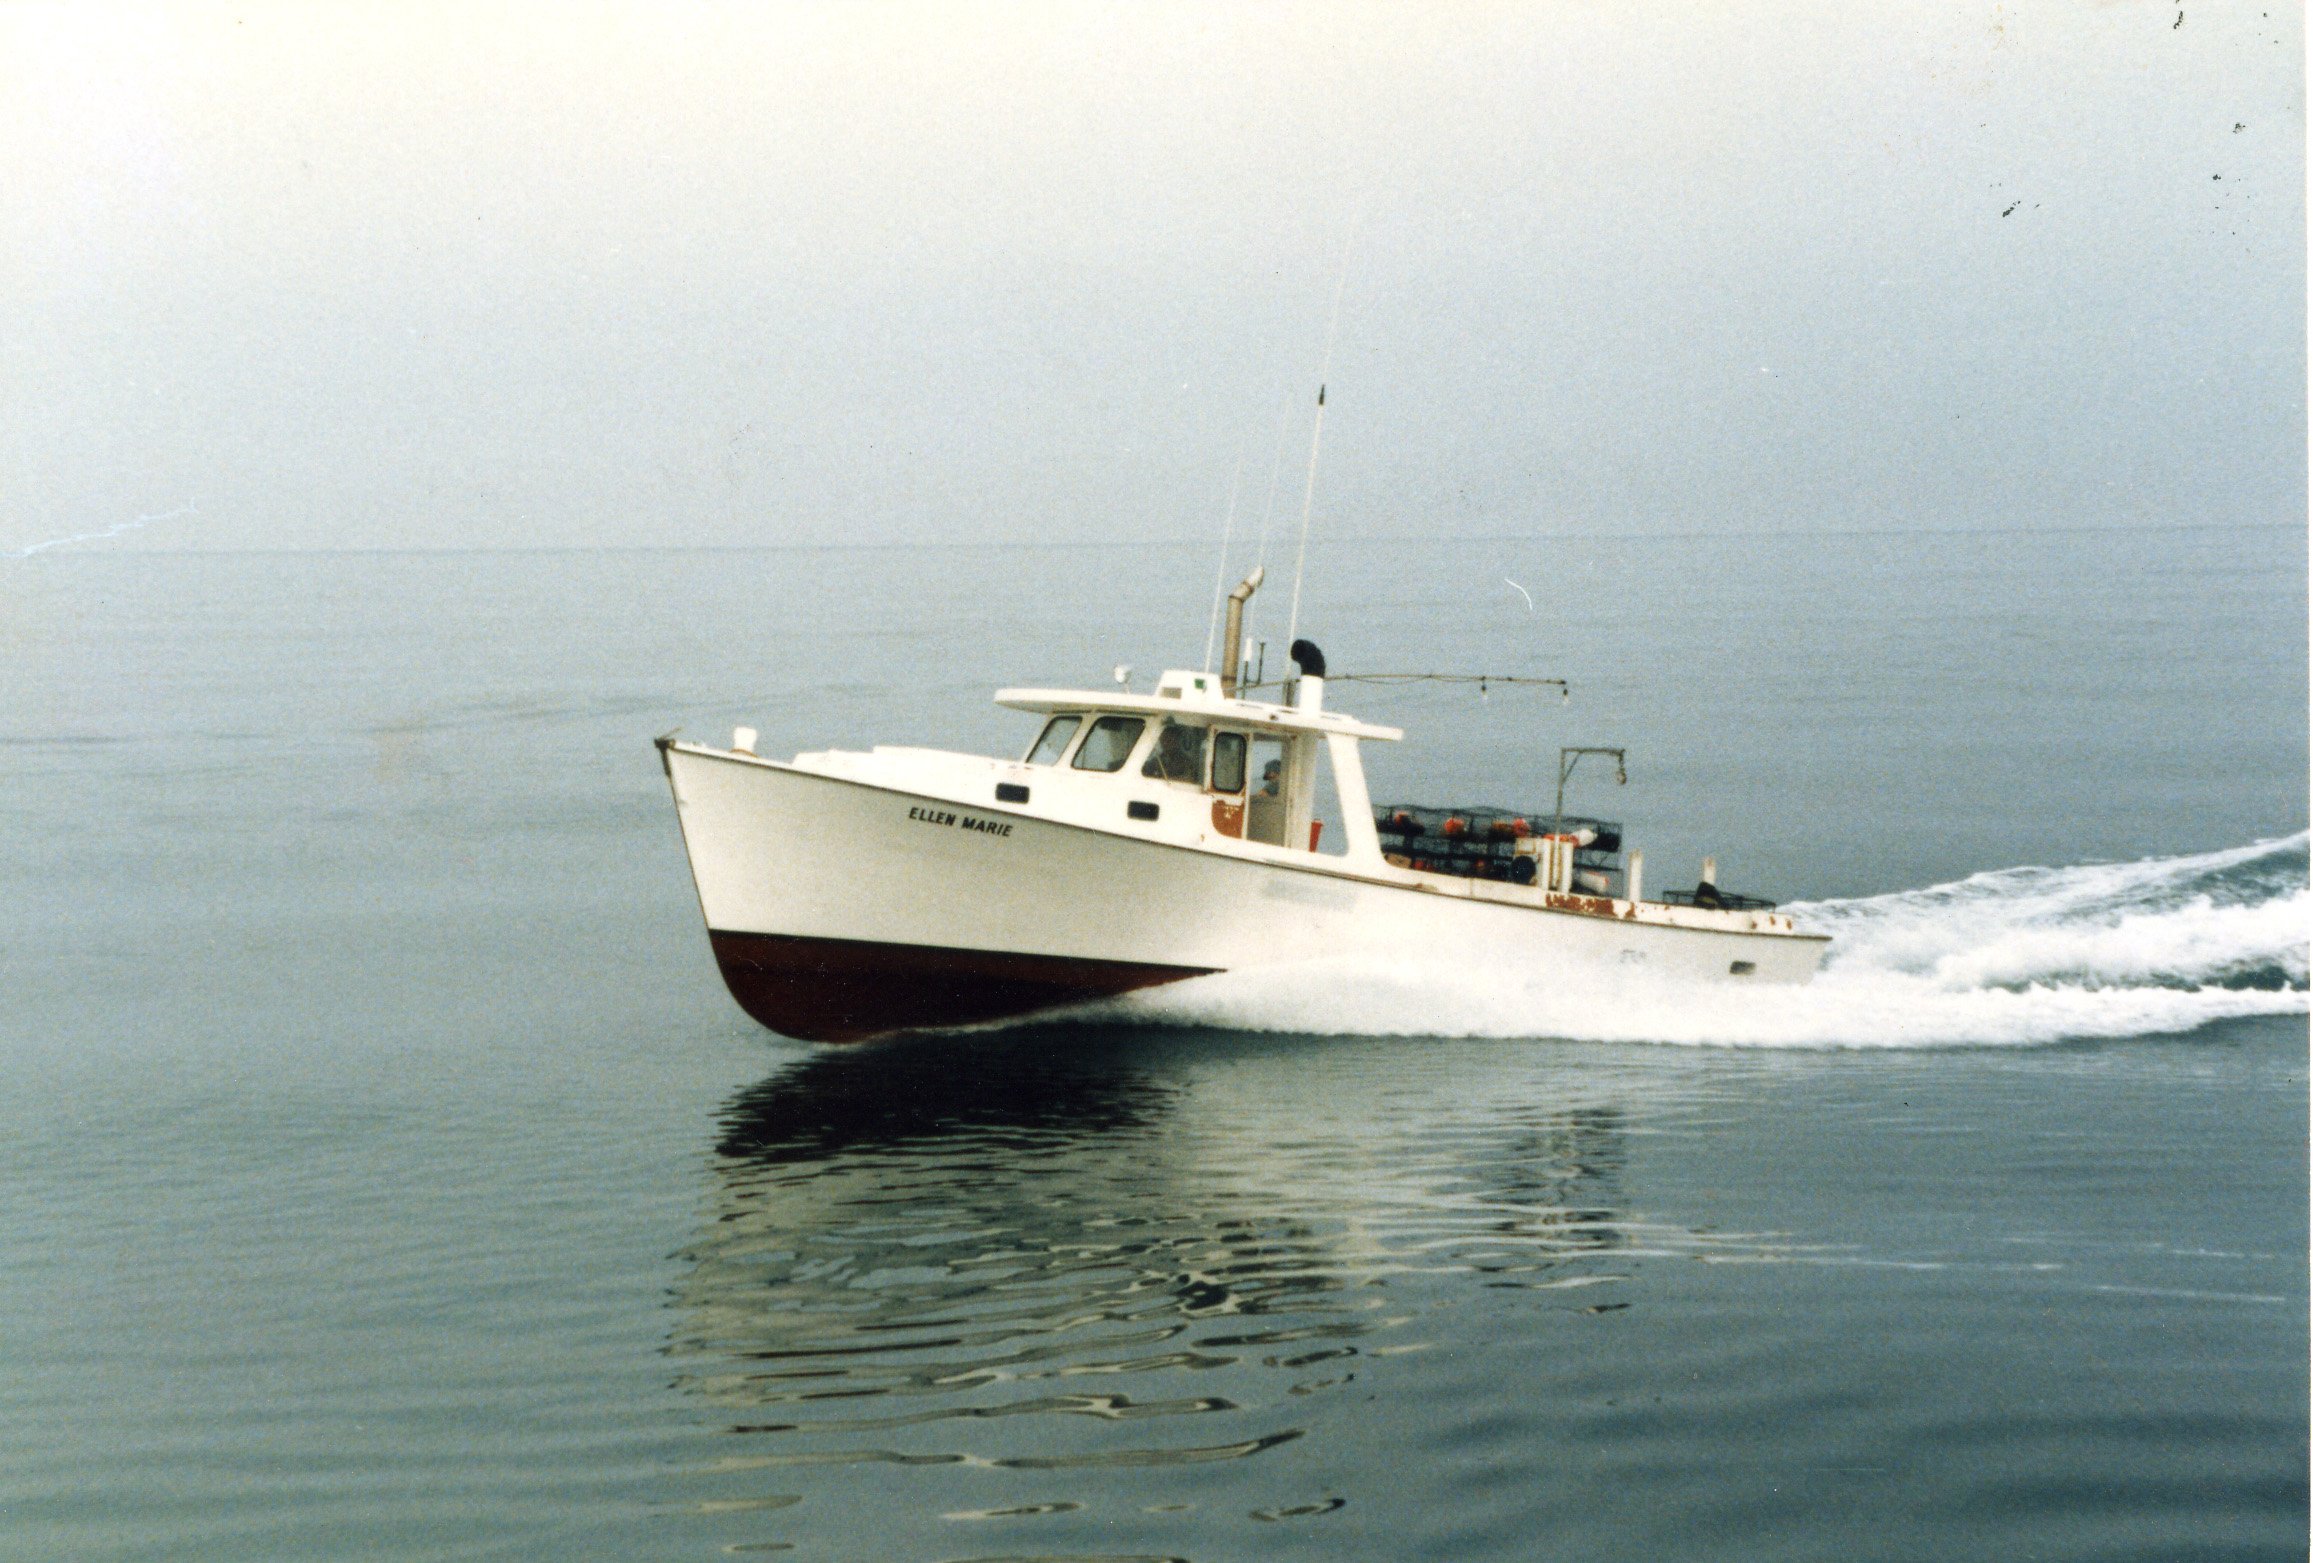 The F/V Ellen Marie “out on a plane” at ocean sea trials after launching, 1985.